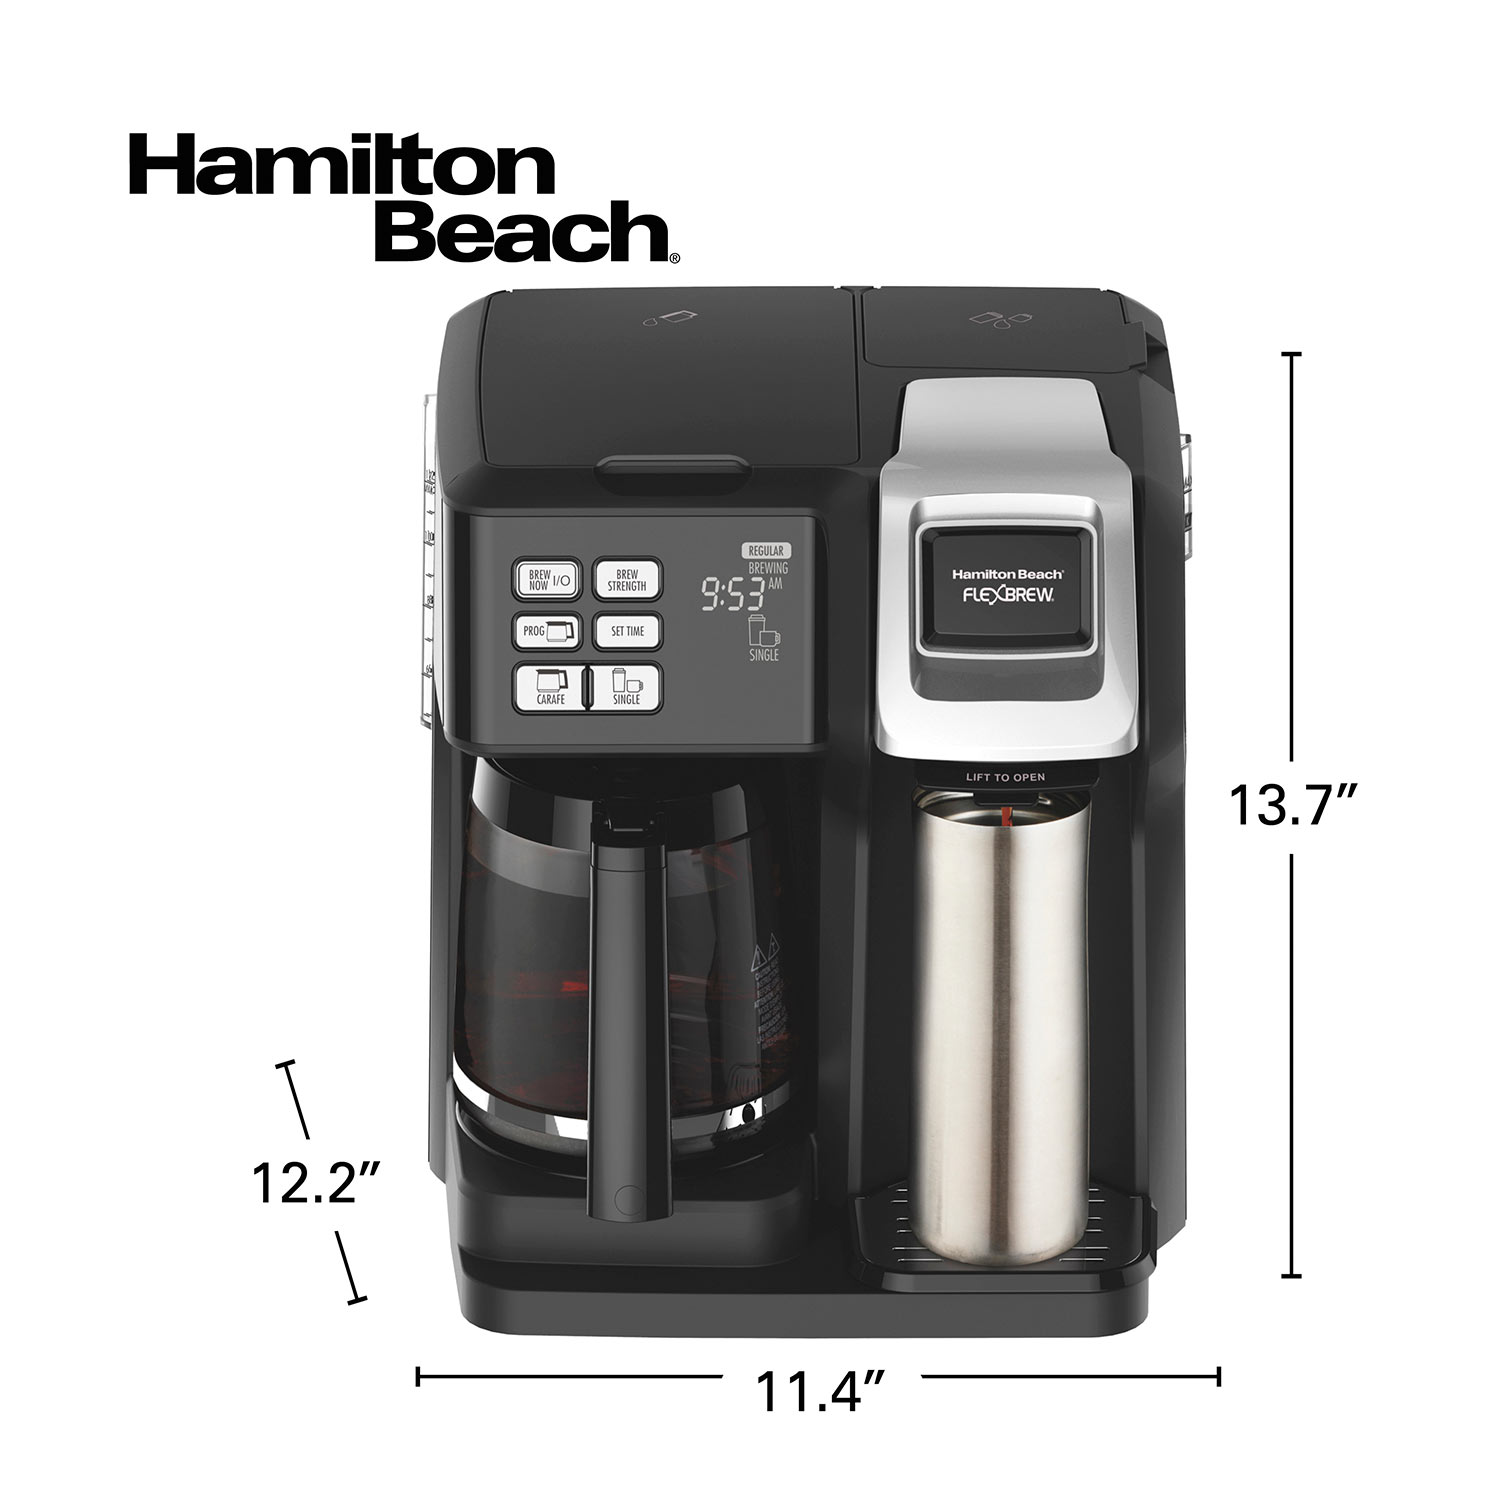 Hamilton Beach 2-Pack Coffee Maker Water Filter at